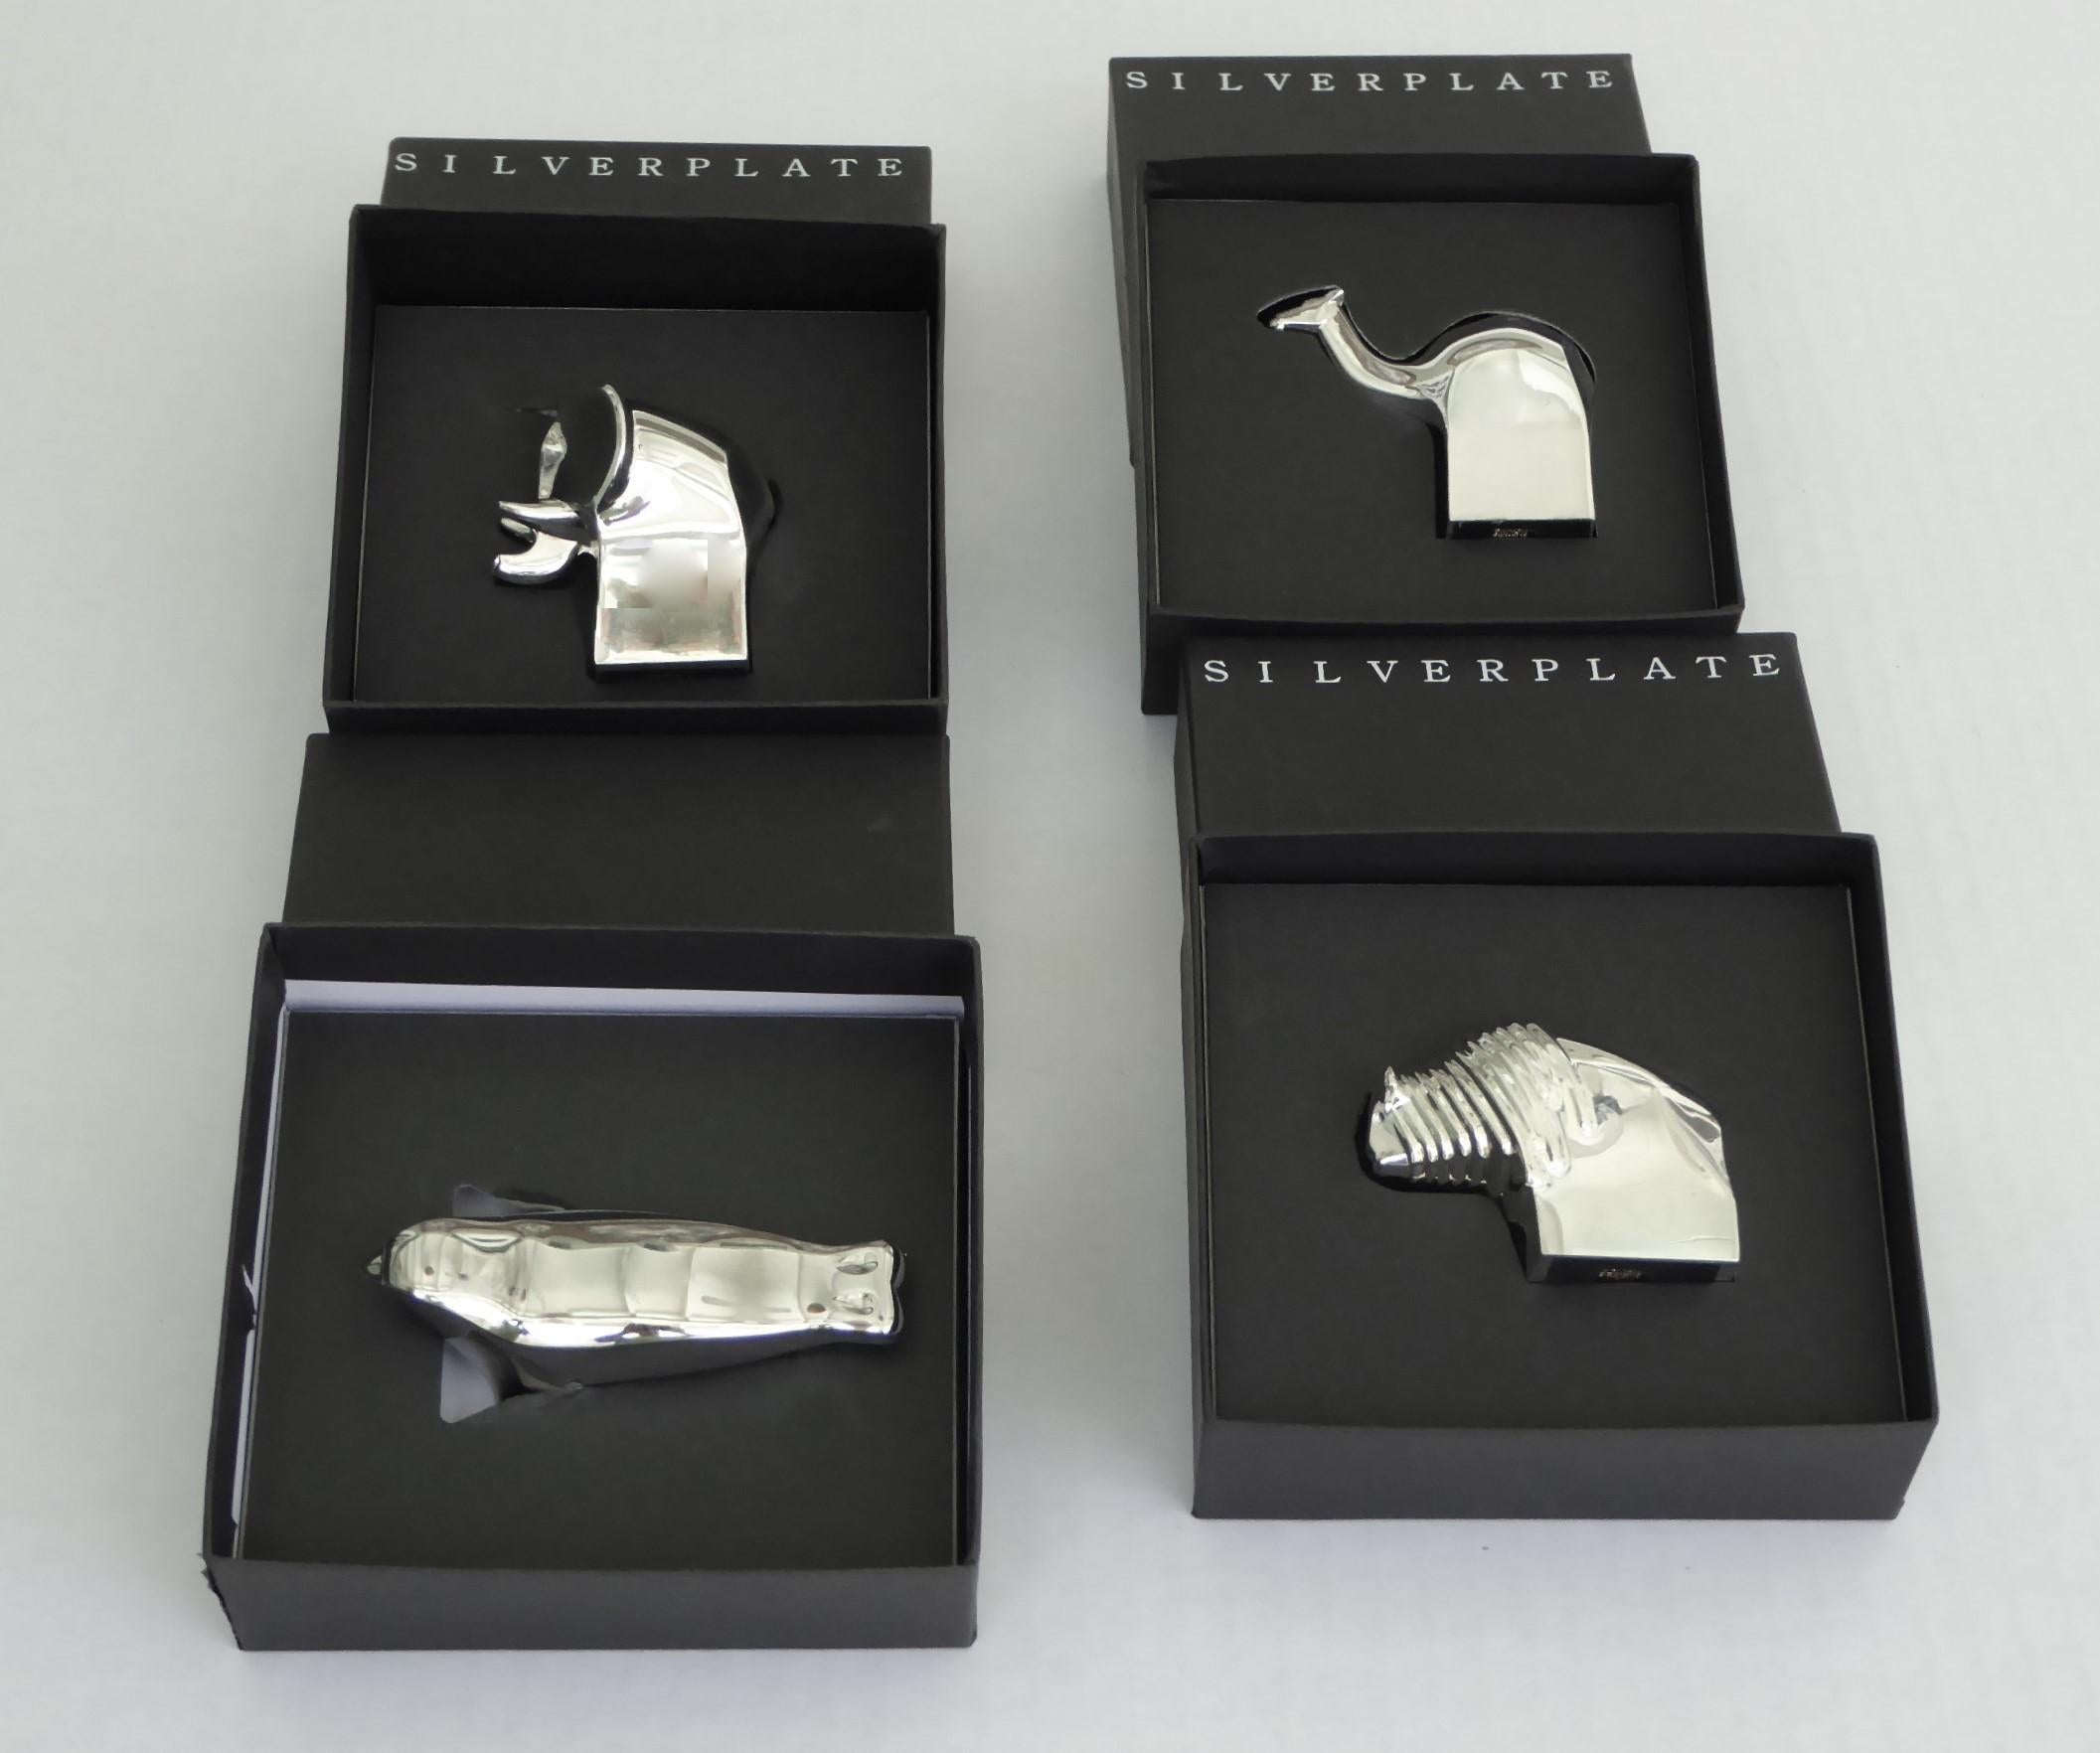 World renowned Danish designer Gunnar Cyren created these decorative silver plated animal paper weights for Dansk Designs in the 1970s. In this grouping you will find an elephant, a seal (Nickel-plated), a Giraffe and an American Bison all in their